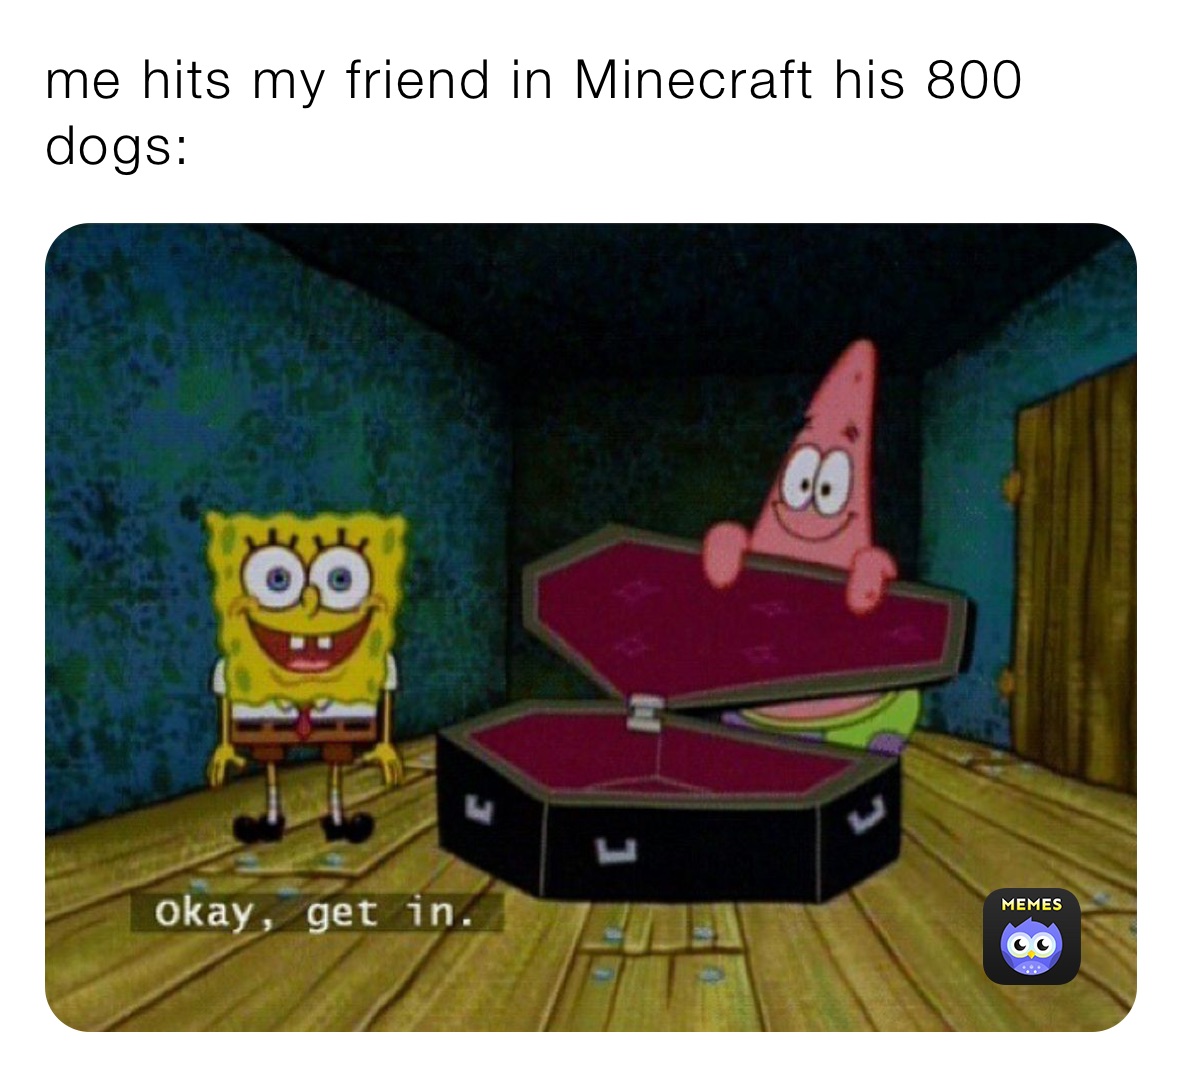 me hits my friend in Minecraft his 800 dogs: